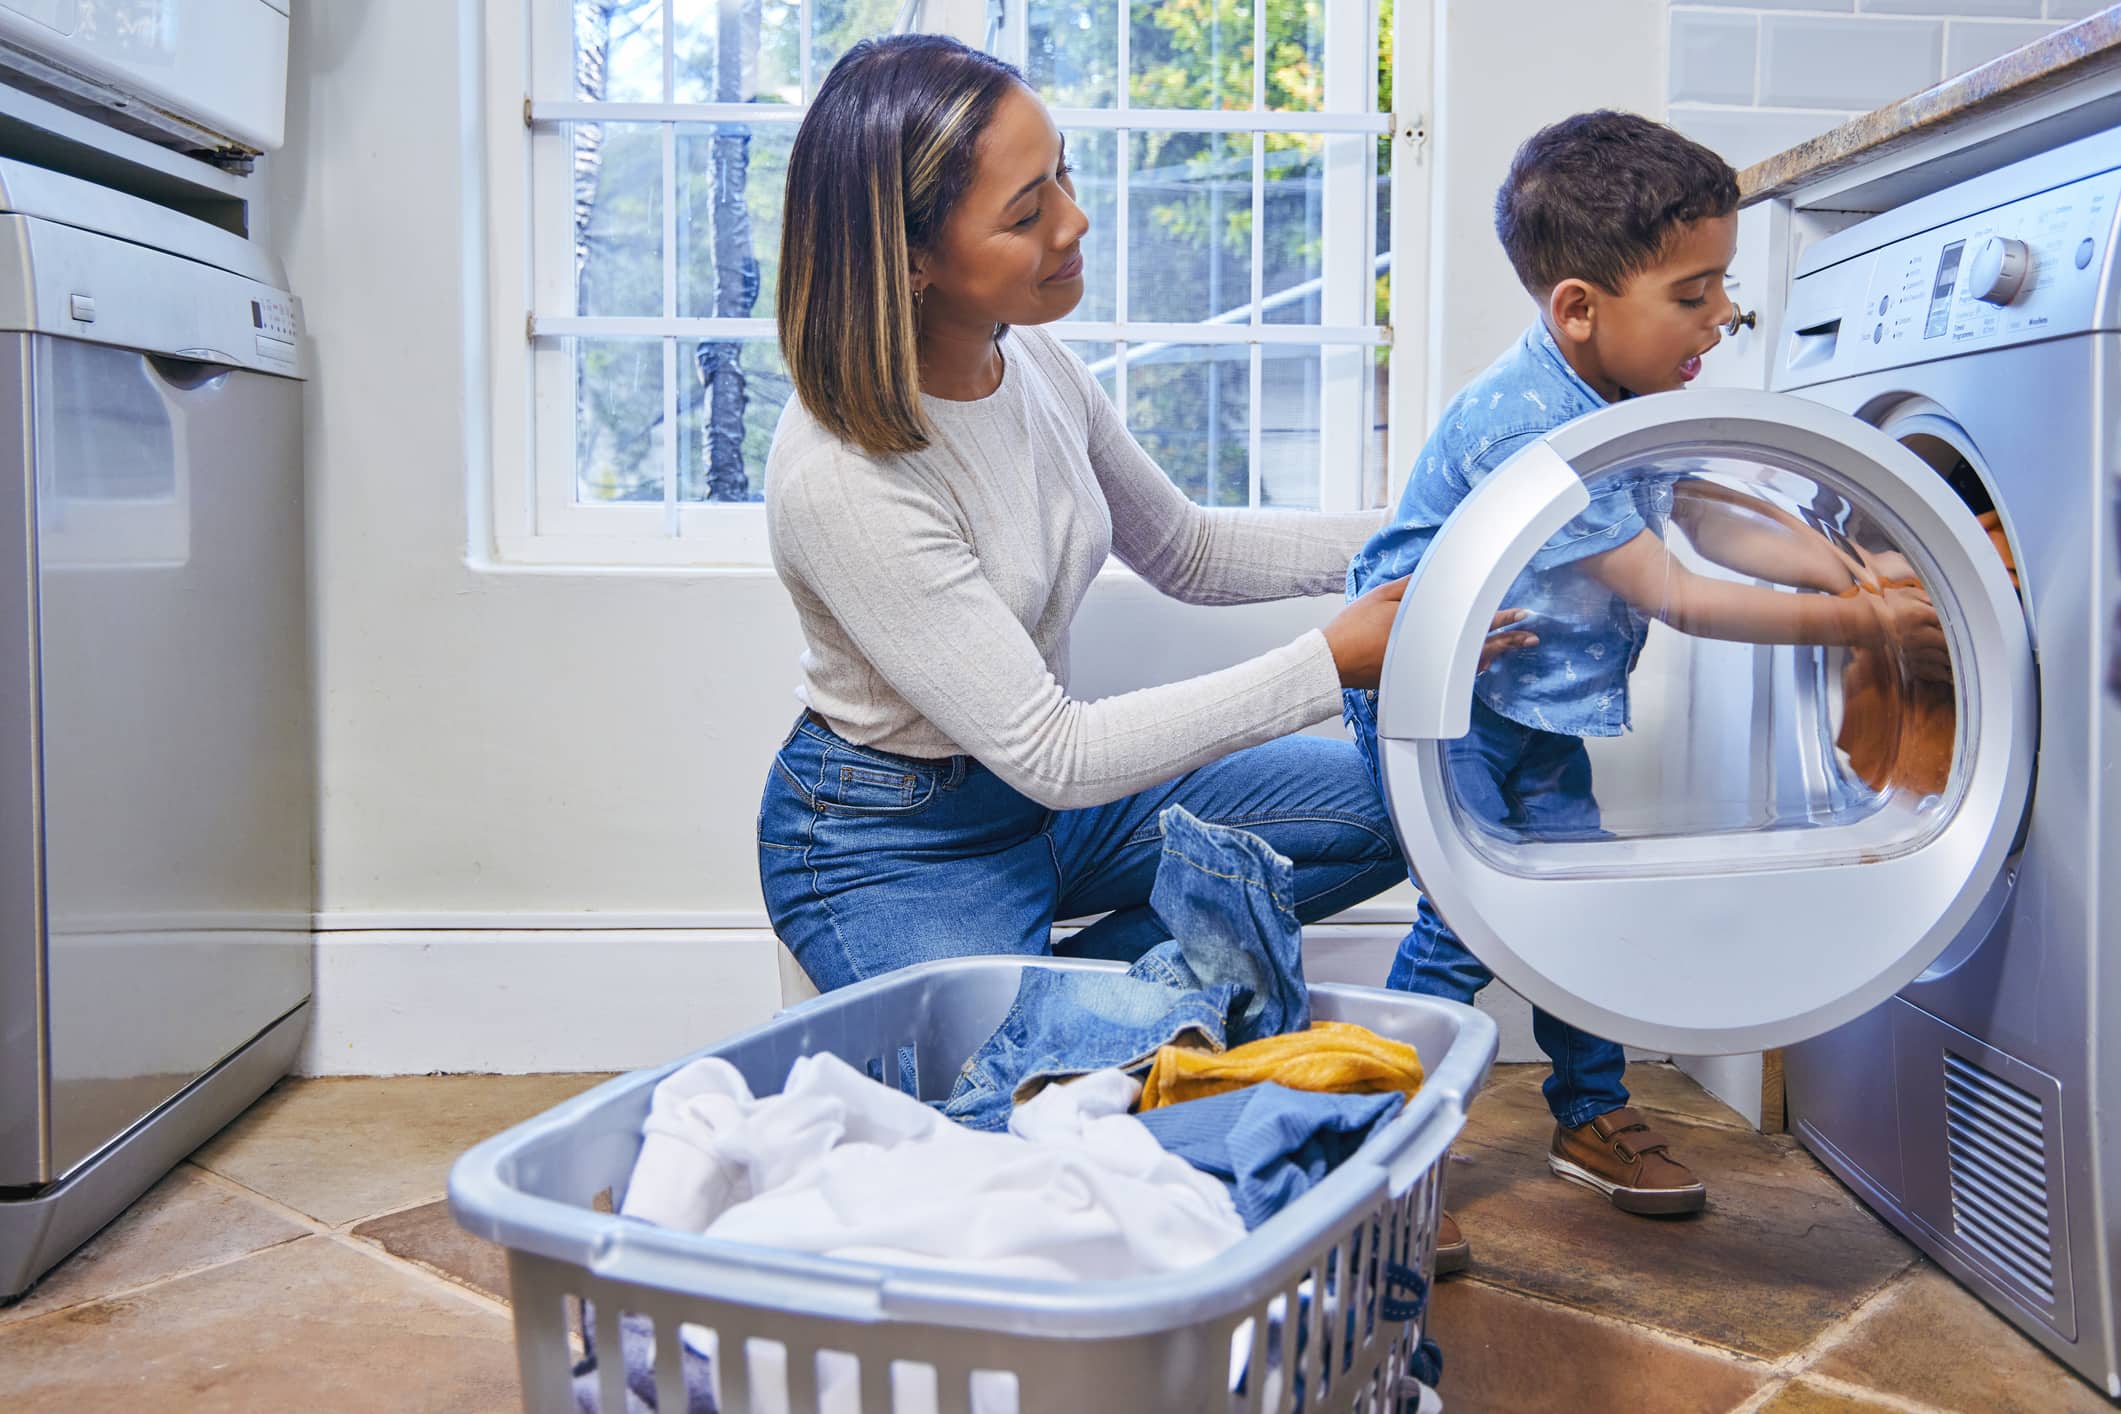 Young boy emptying the dryer and his mom kneeling behind him helping.